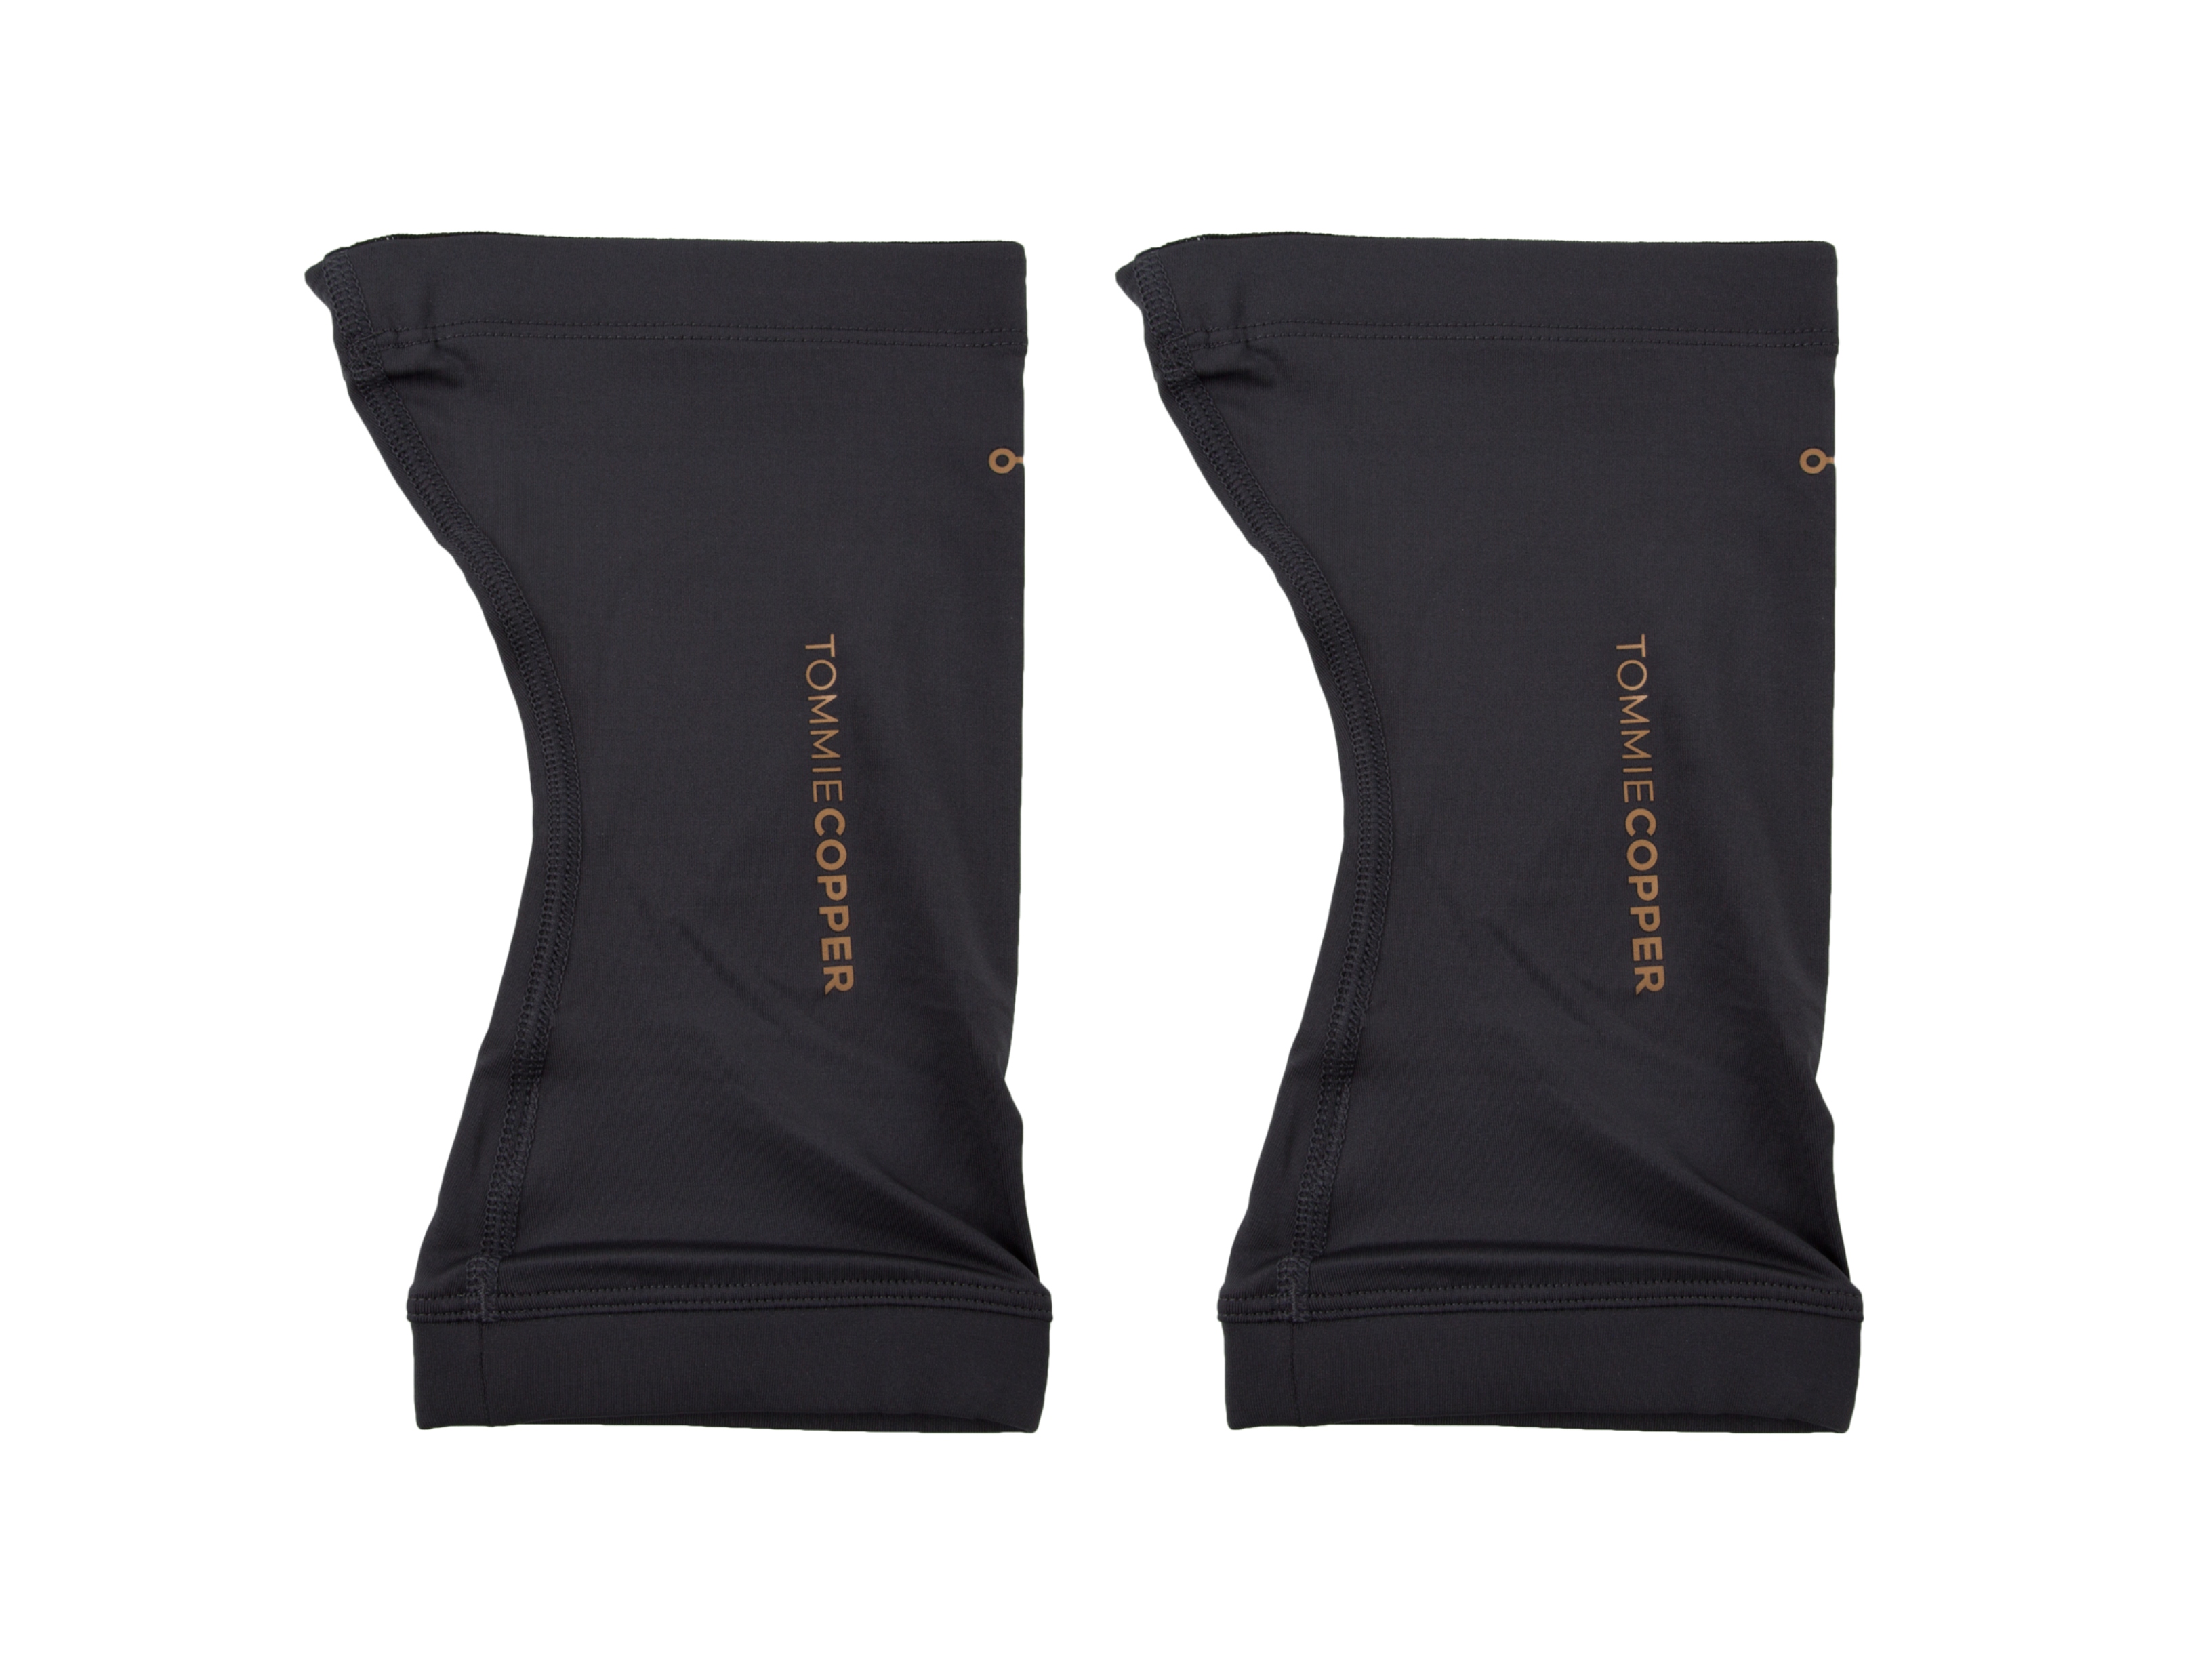 Tommie Copper 2-Pack Compression Support Tank Tops